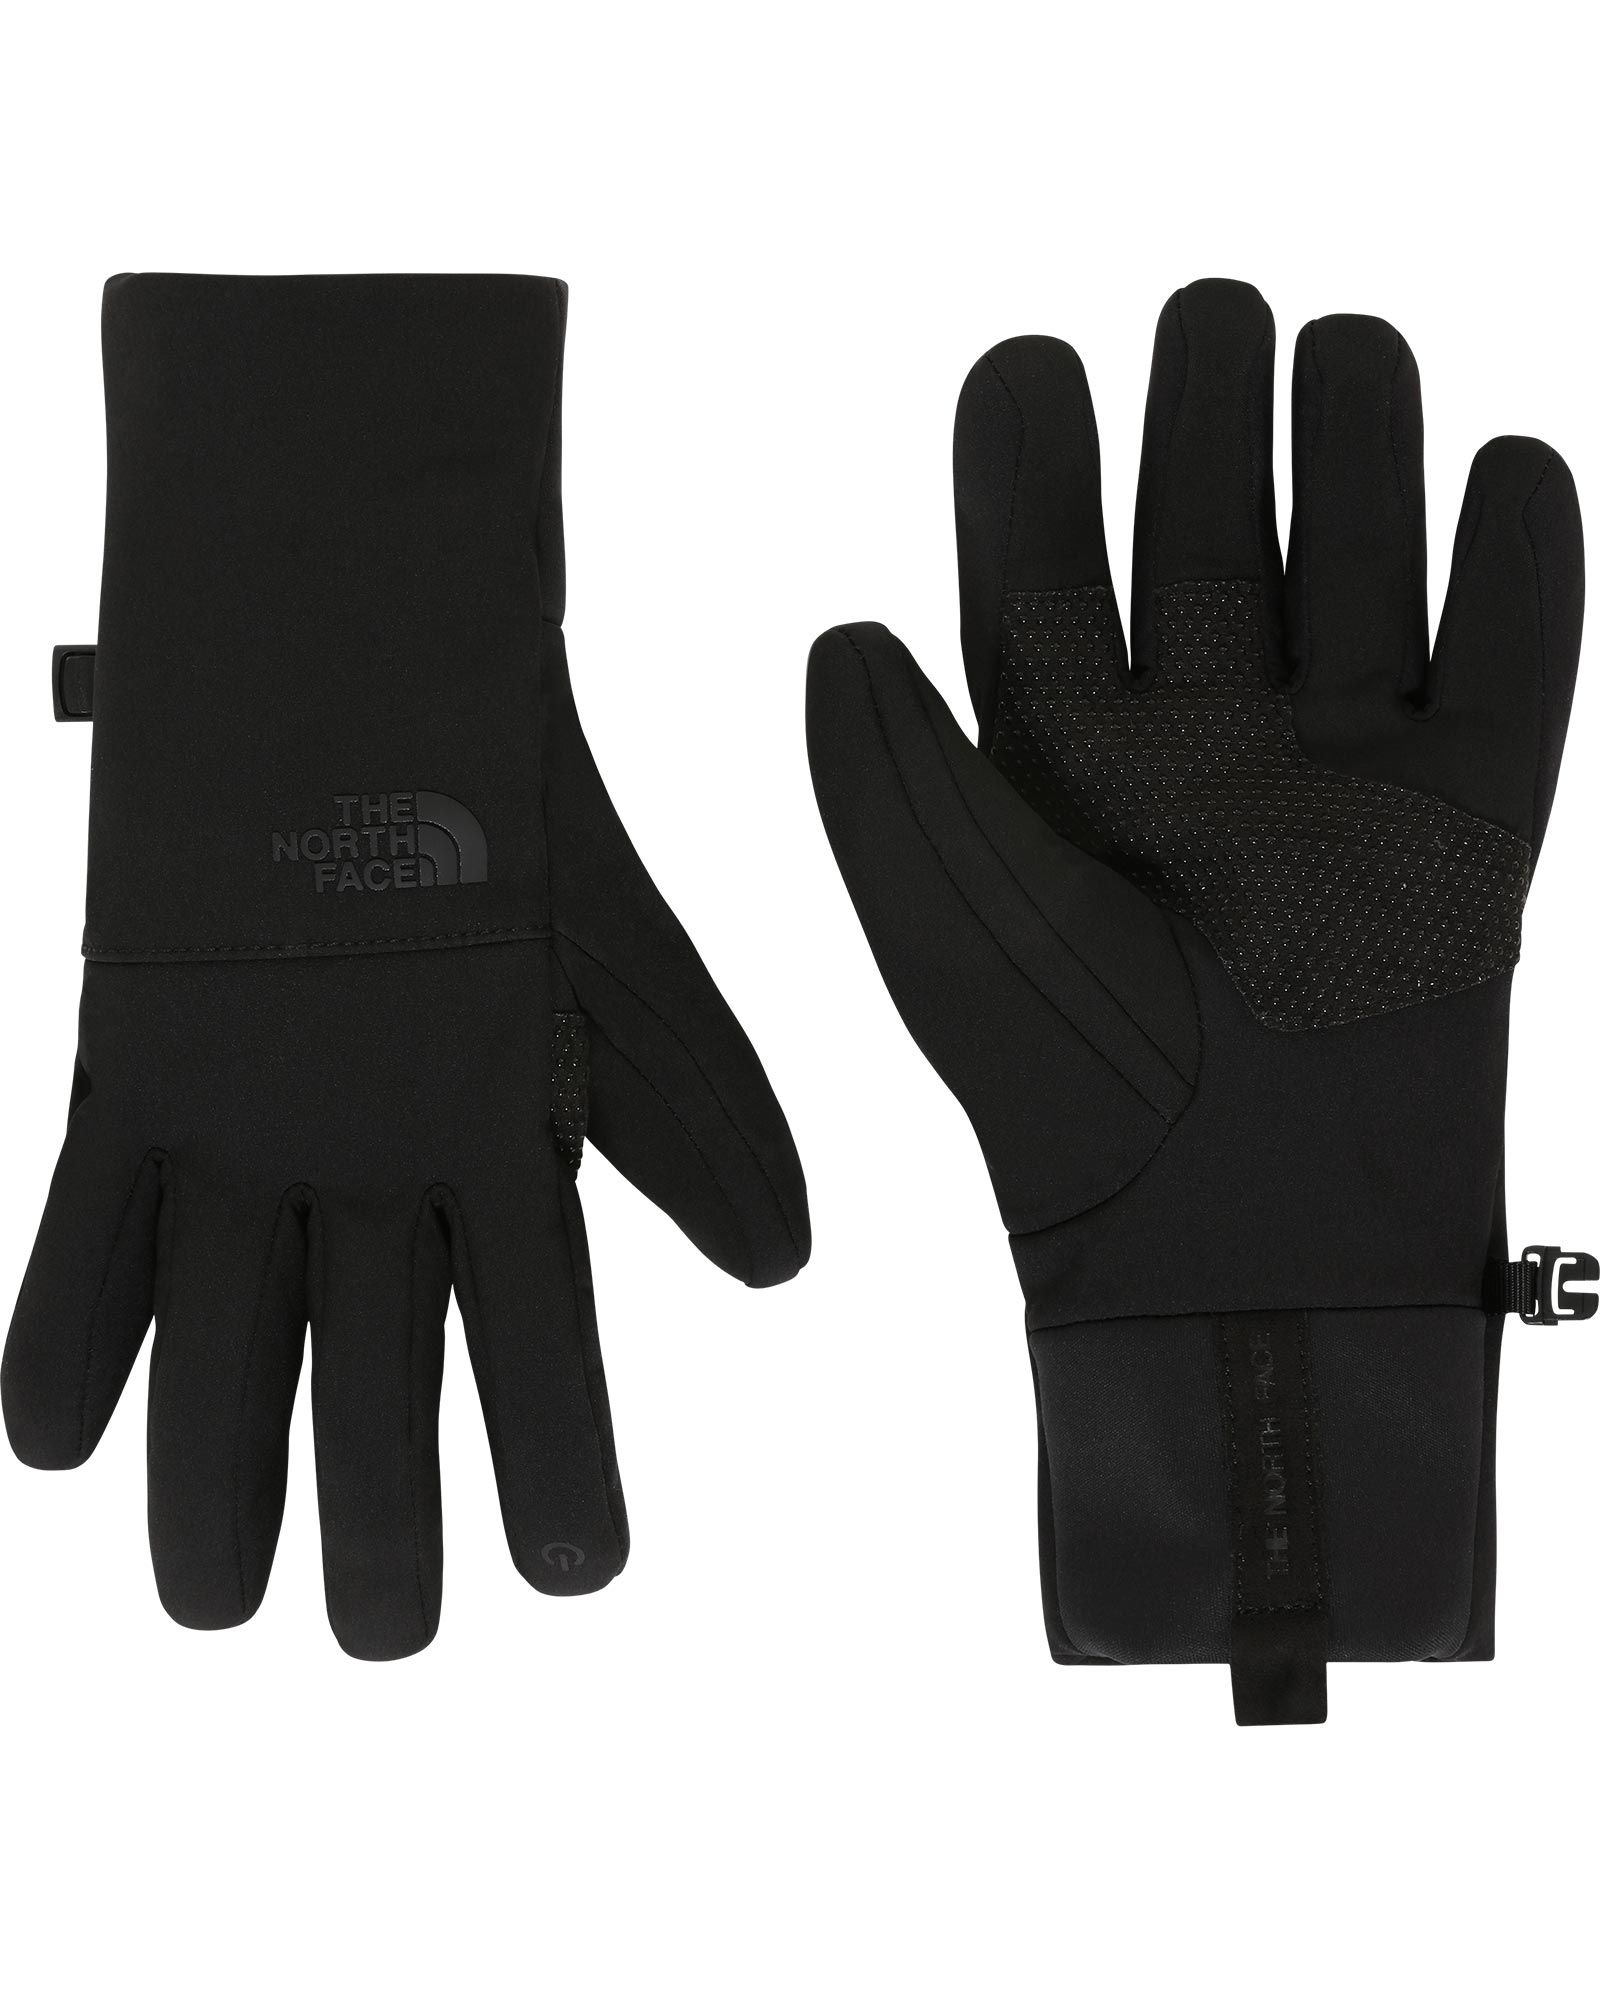 The North Face Apex+etip Womens Gloves